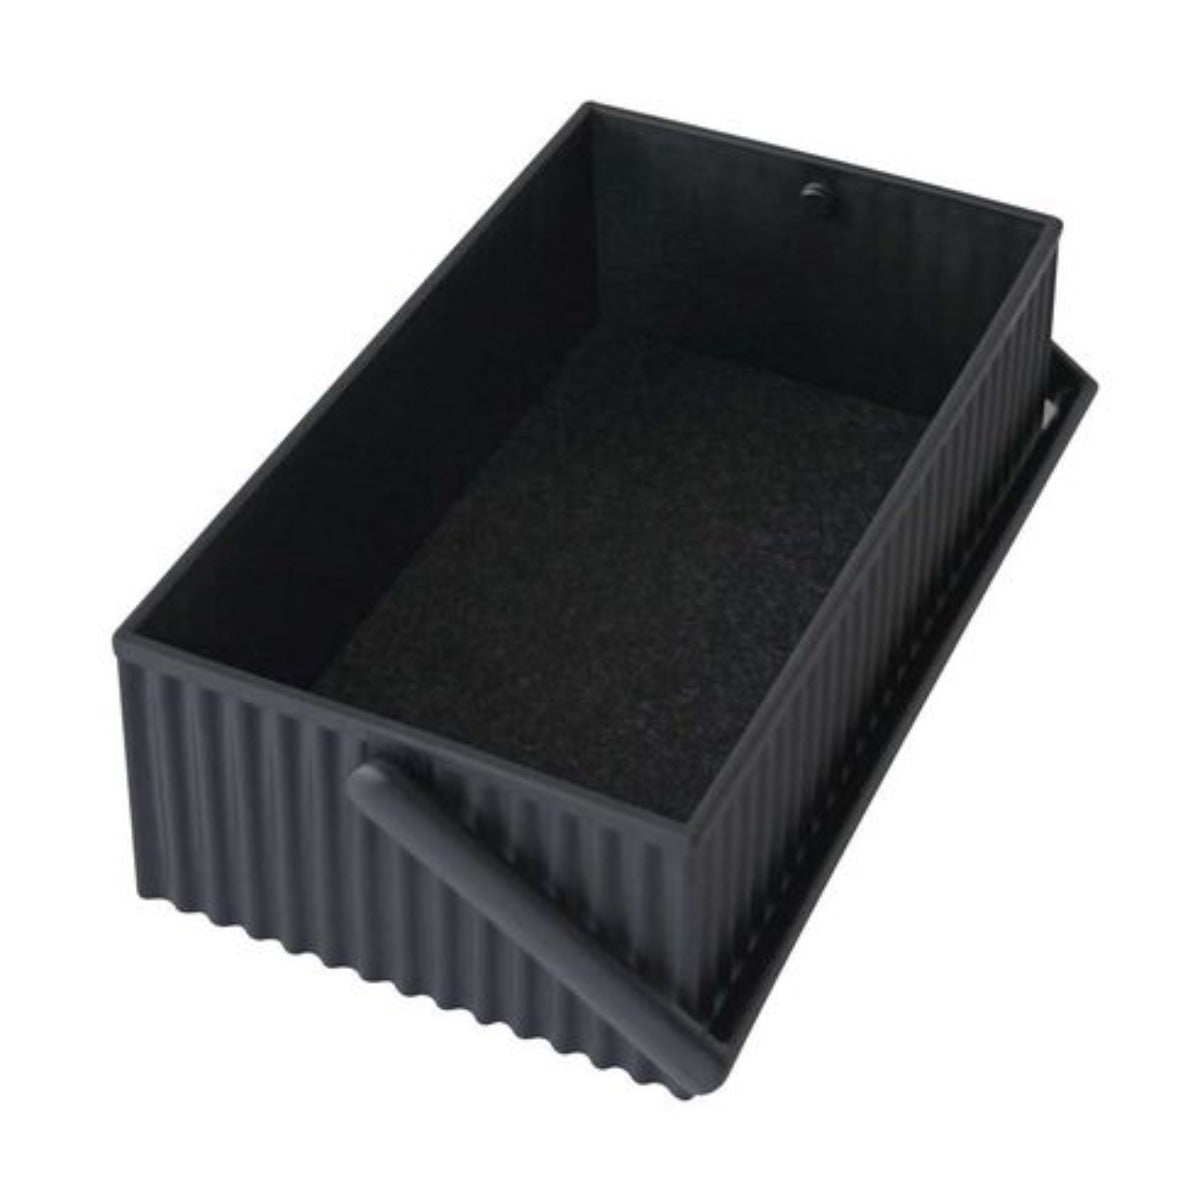 Hachiman Omnioffre Stacking Storage Box Black - choose from 3 sizes